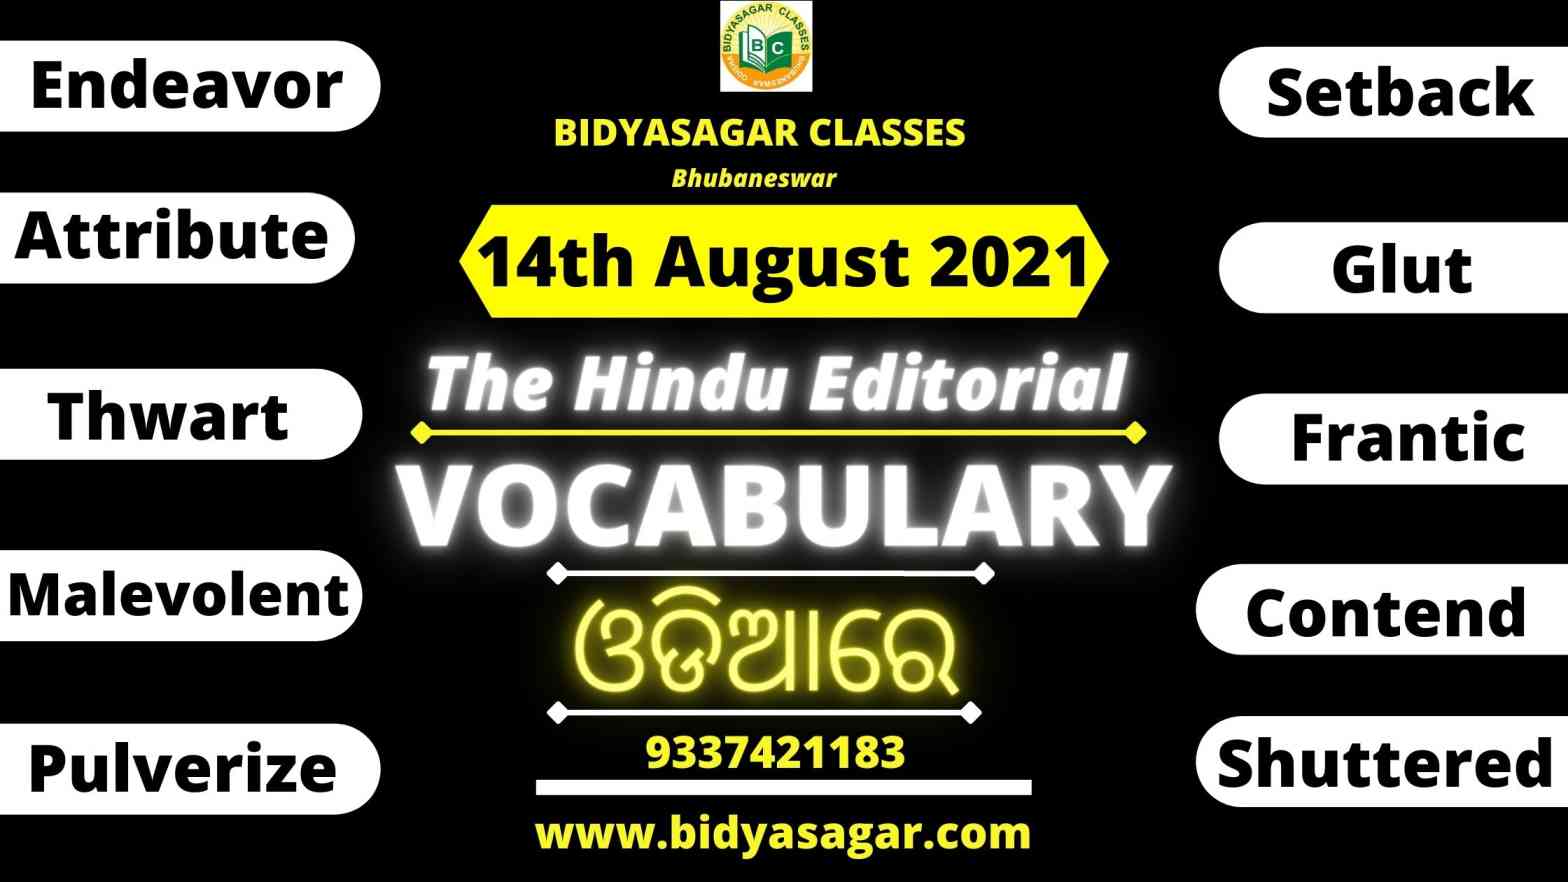 The Hindu Editorial Vocabulary of 14th August 2021